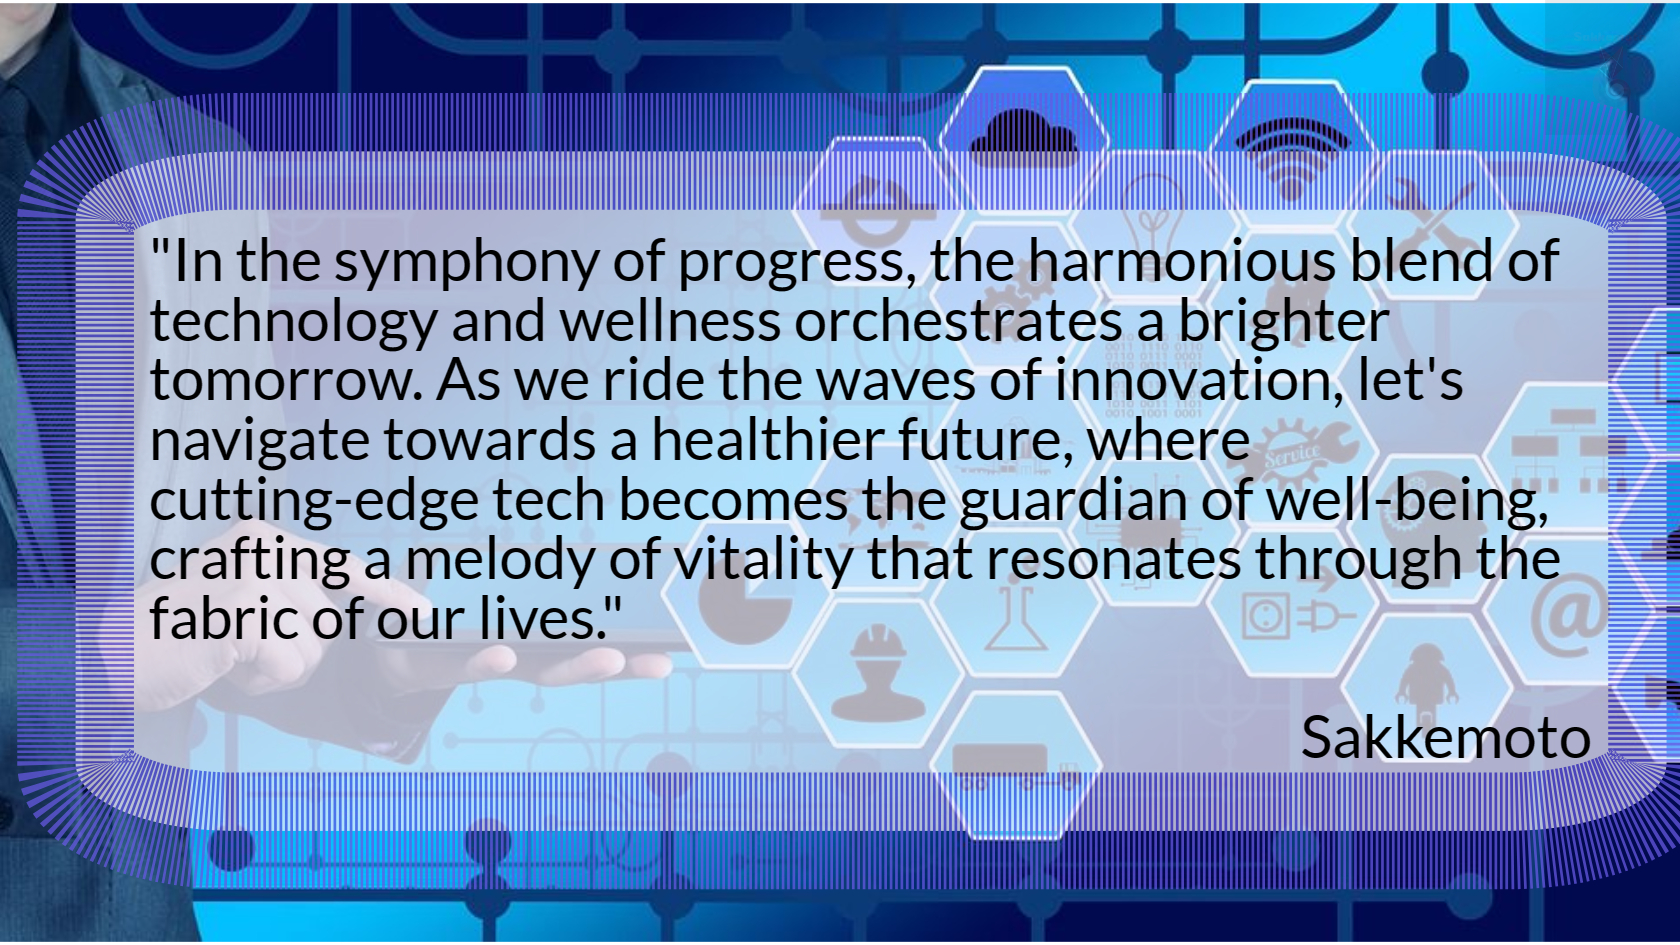 In the symphony of progress, the harmonious blend of technology and wellness orchestrates a brighter tomorrow.